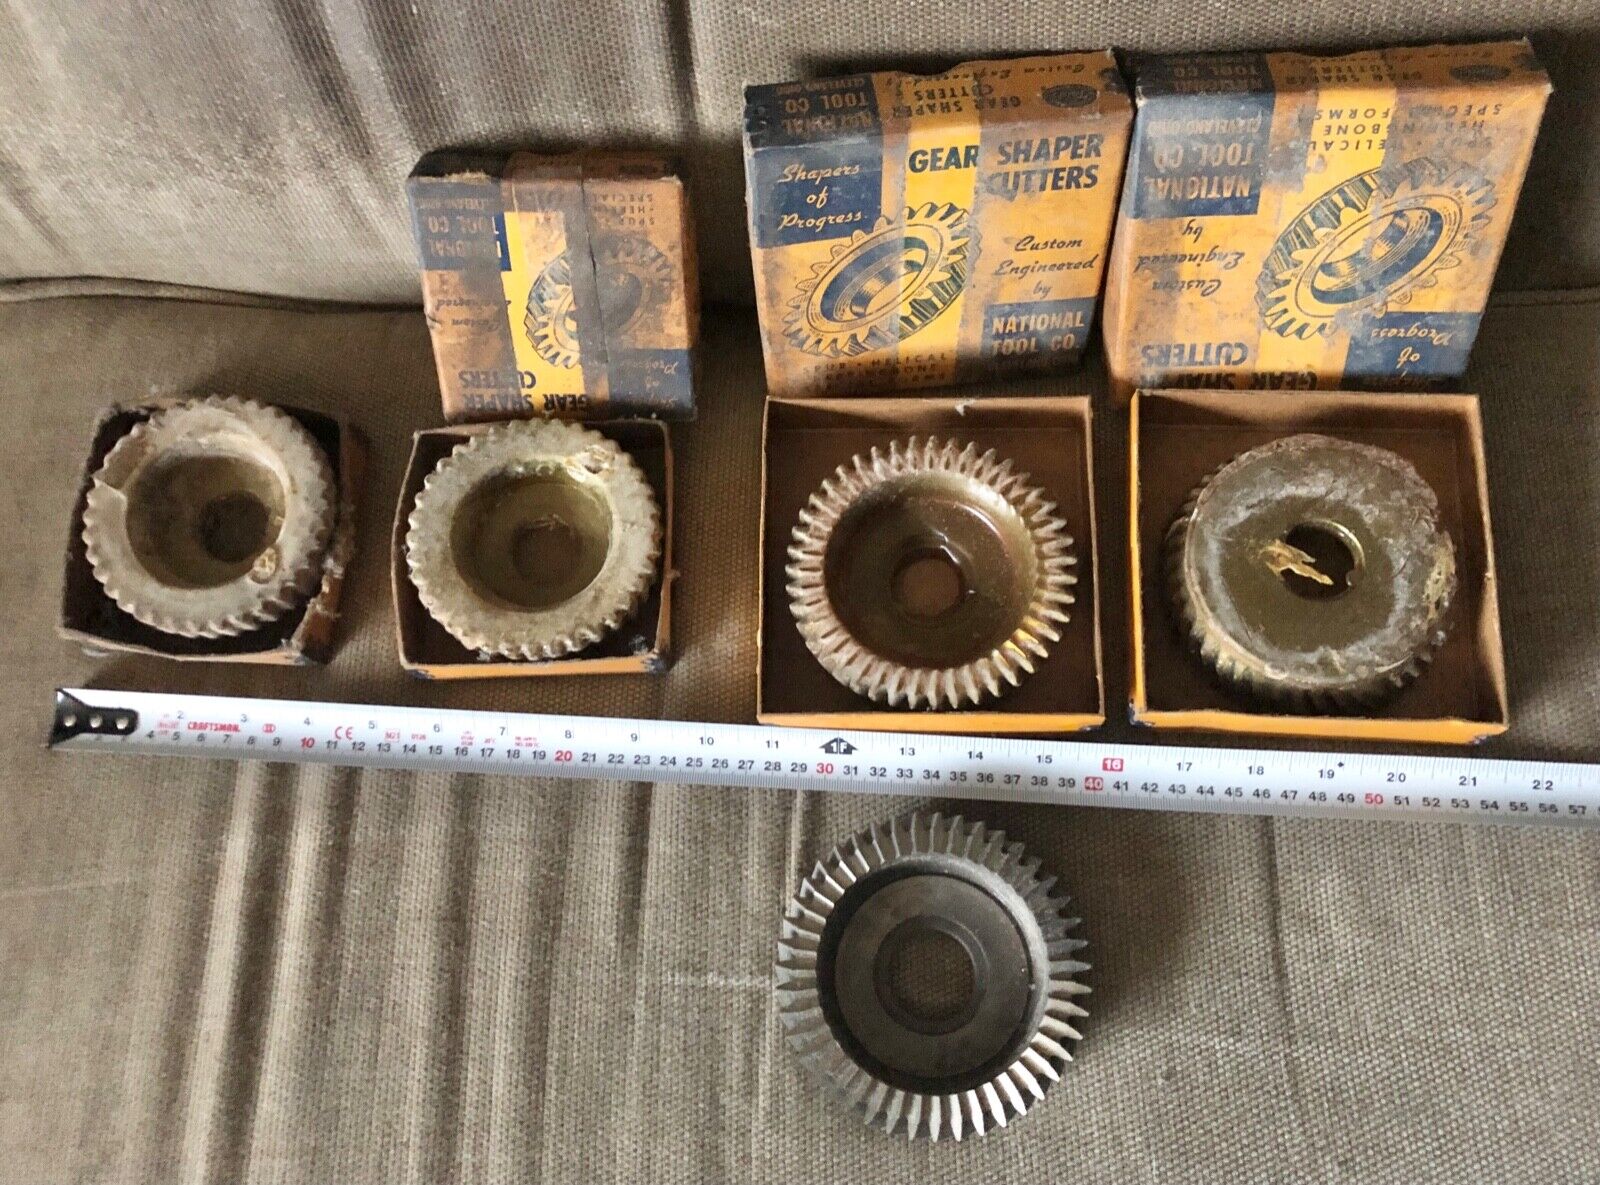 Lot of 5 NOS National Tool Gear Shaper Cutters - USA